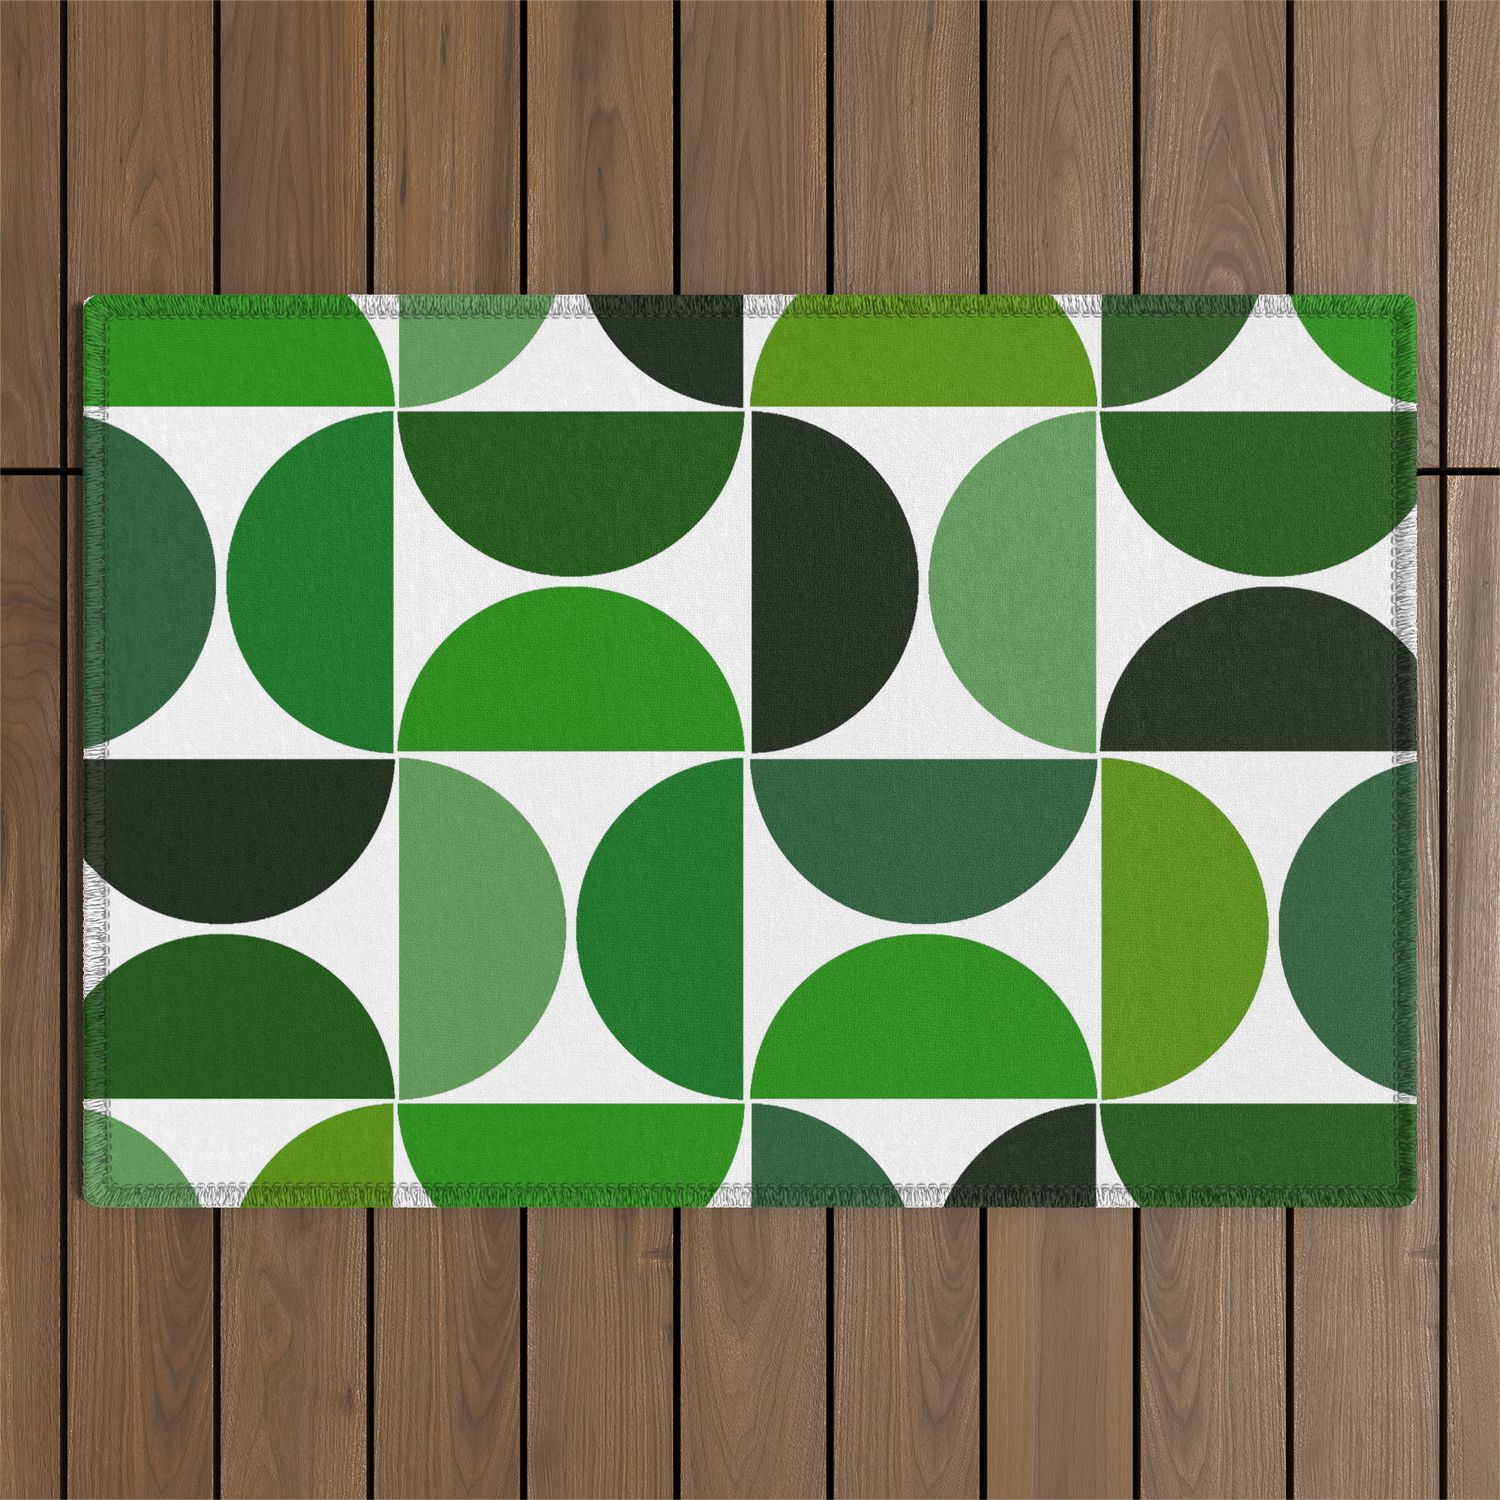 Mid Century Modern Geometric Green Outdoor Rugartstudio88design |  Society6 Throughout Green Outdoor Rugs (Photo 9 of 15)